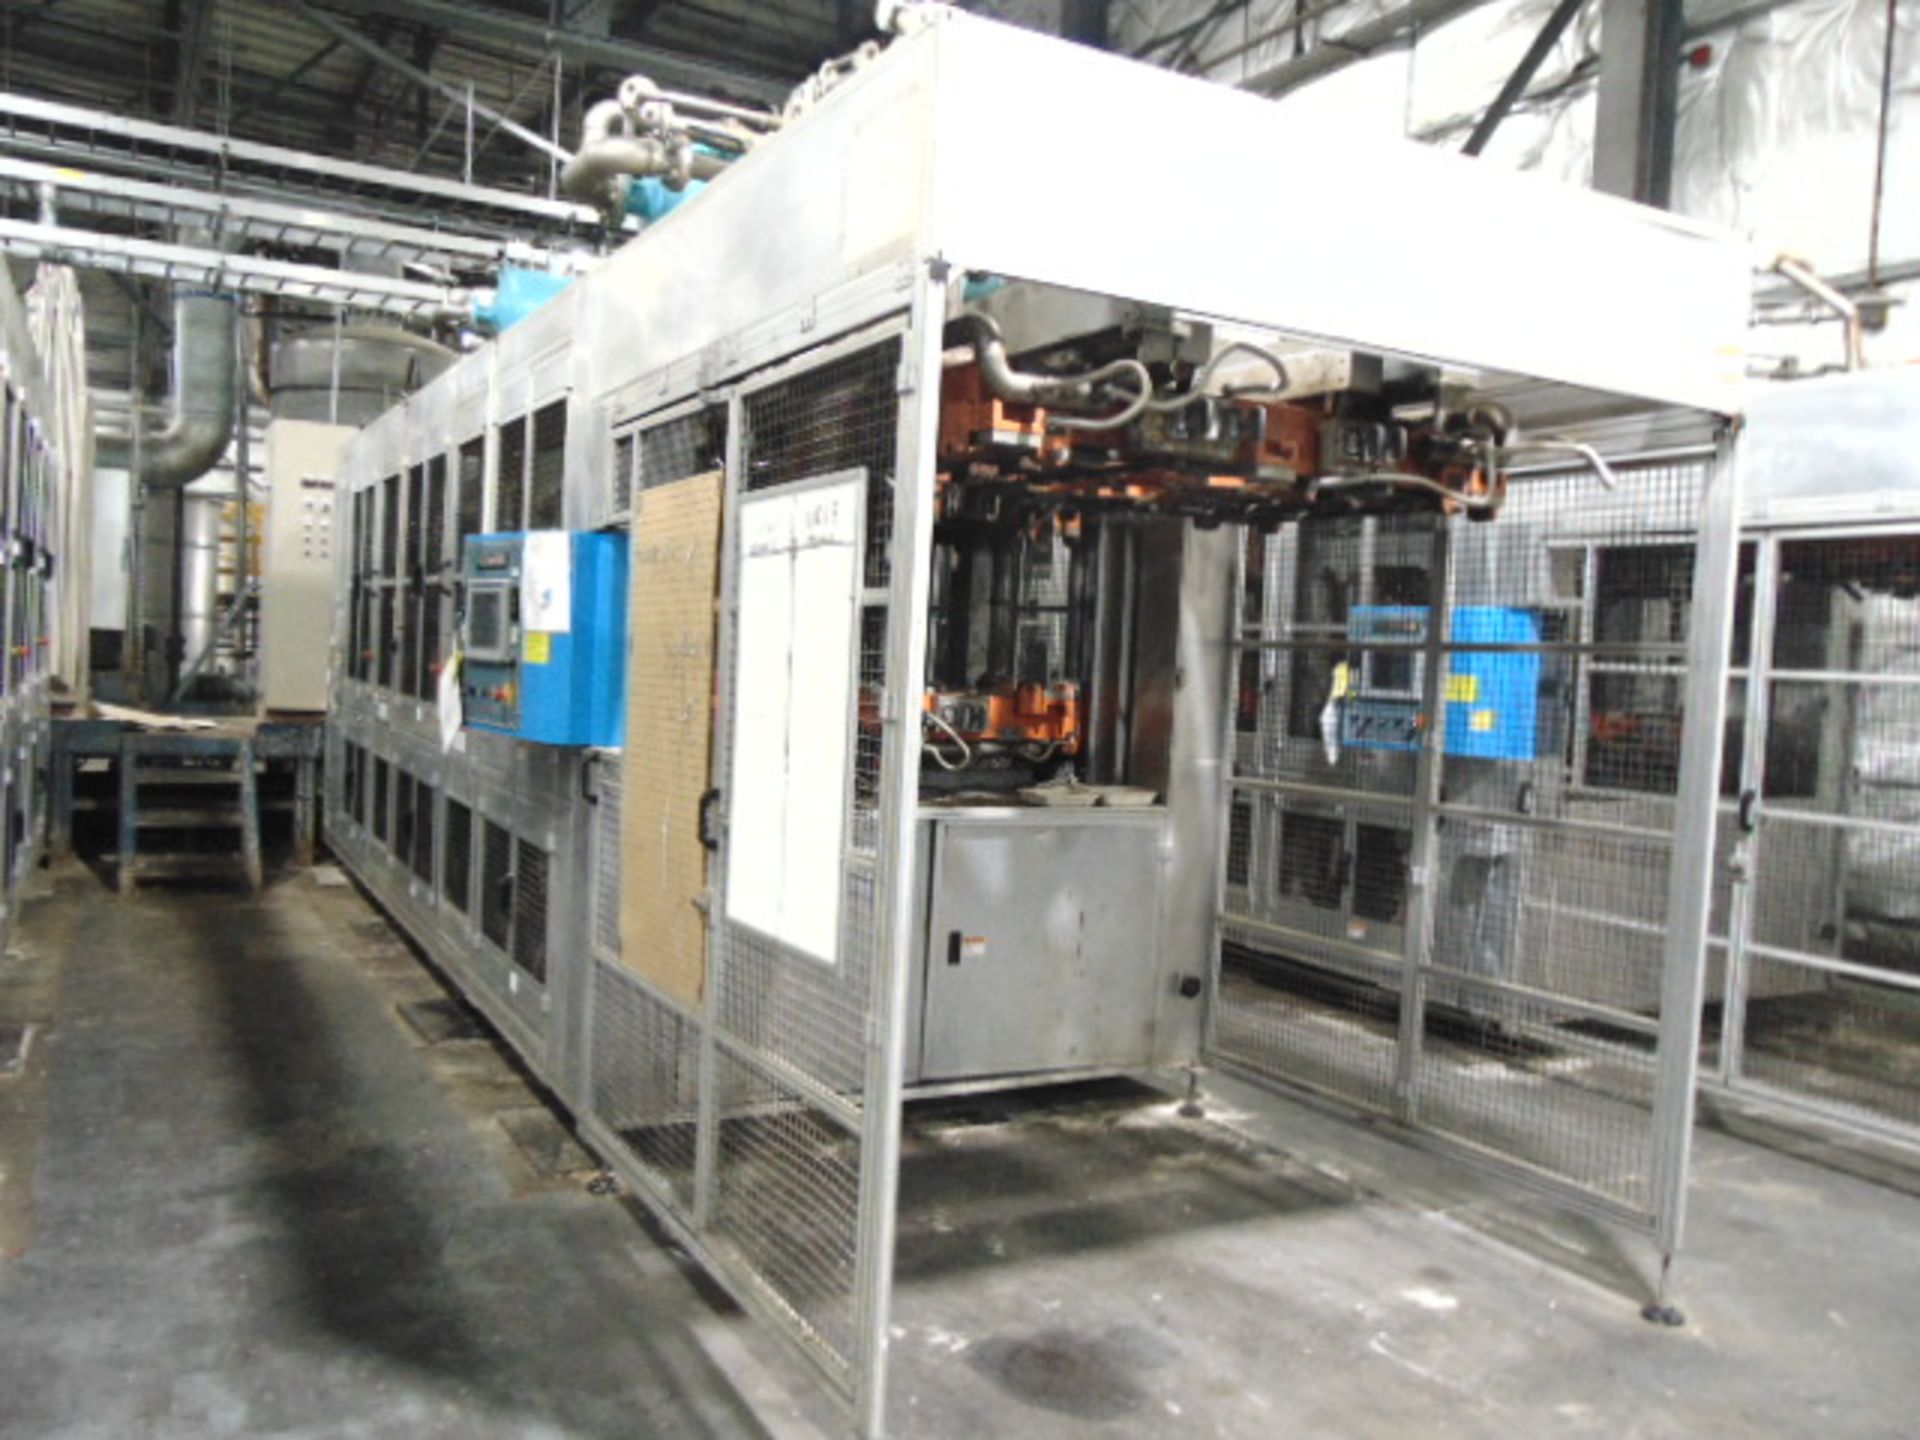 THERMOFORMING MACHINE, TAIWAN PULP MOLDING MDL. TPM-1500, mfg. 5/2015, installed 2016, 1500mm x